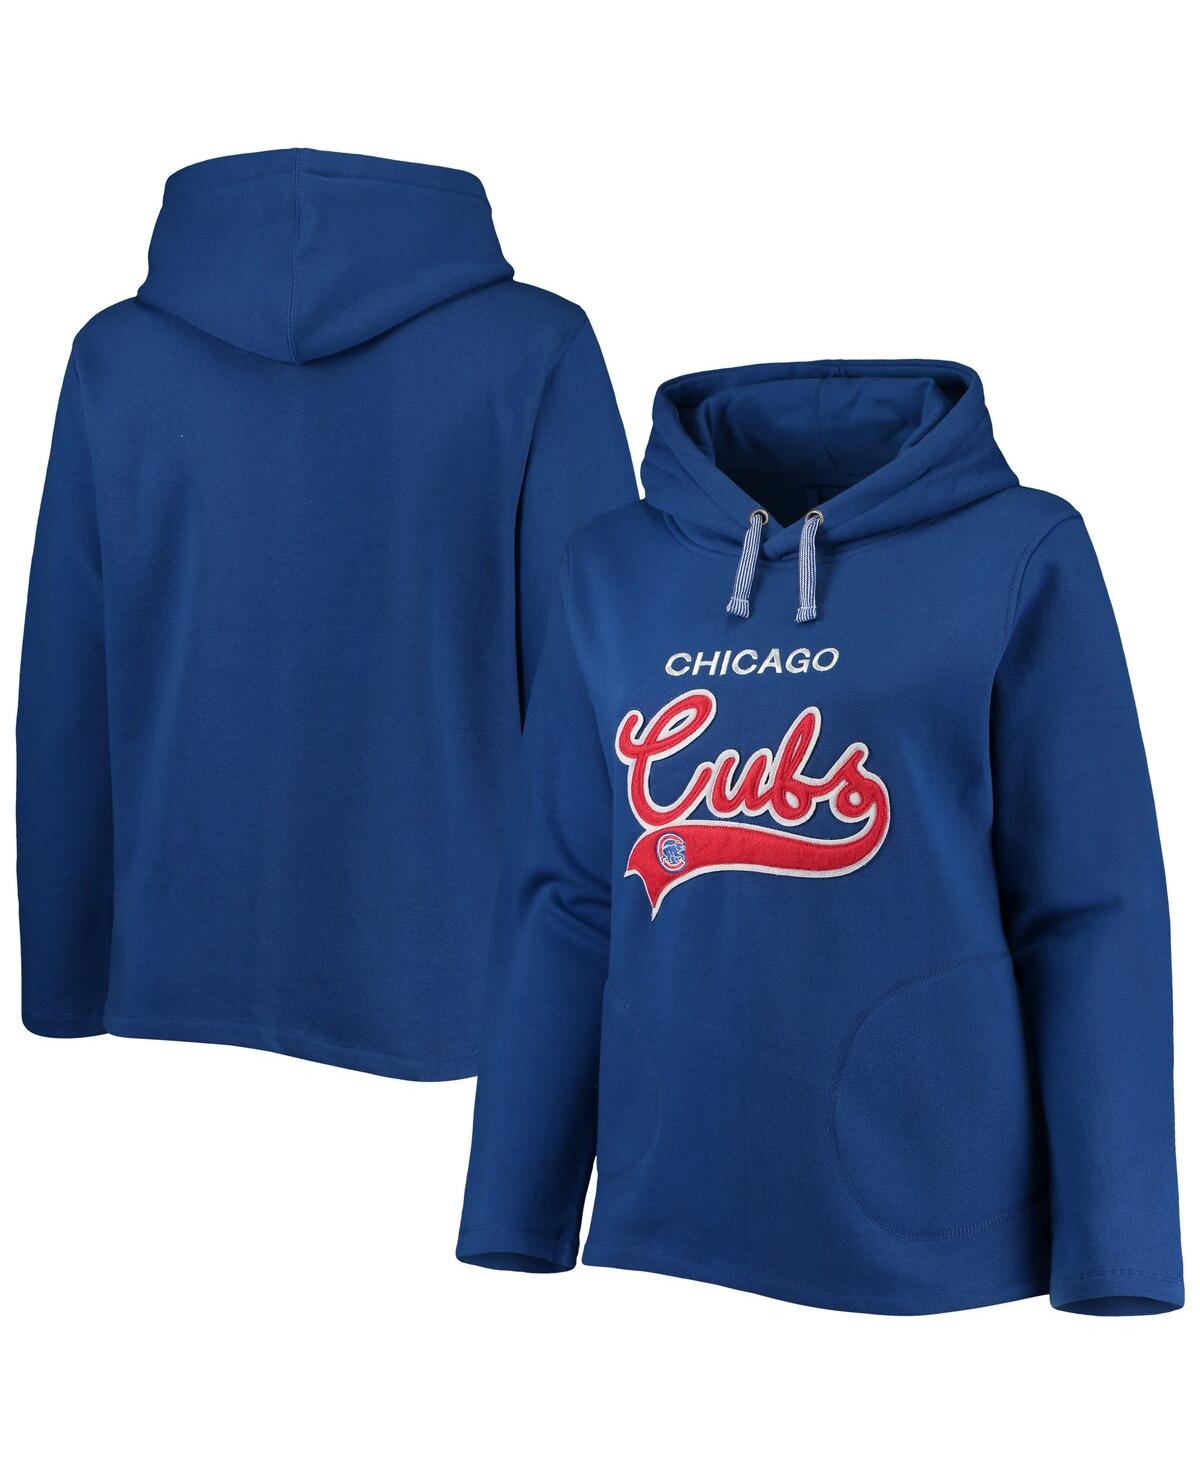 Women's Soft as a Grape Royal Chicago Cubs Plus Size Side Split Pullover Hoodie - Royal